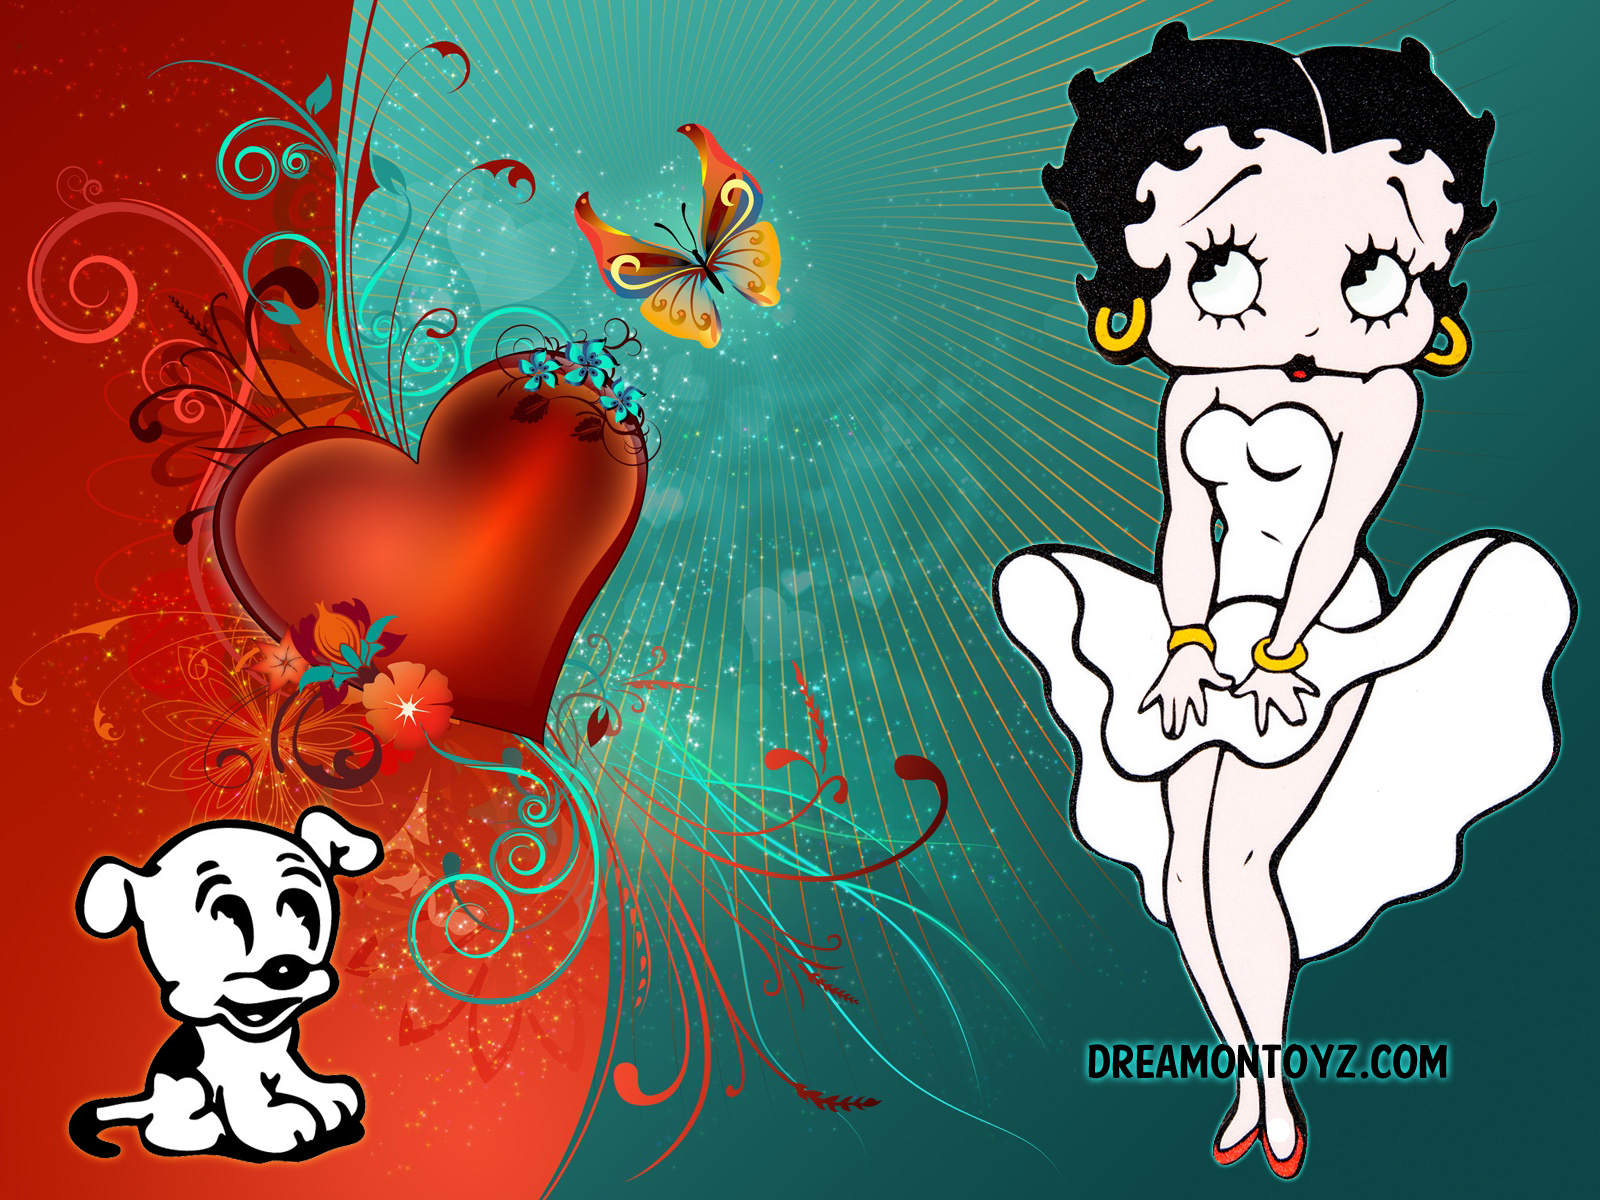 Free Download Wallpaper Betty Boop Wallpaper For Walls 1600x10 For Your Desktop Mobile Tablet Explore 50 Betty Boop Screensavers And Wallpaper Betty Boop Halloween Wallpaper Betty Boop Desktop Wallpaper